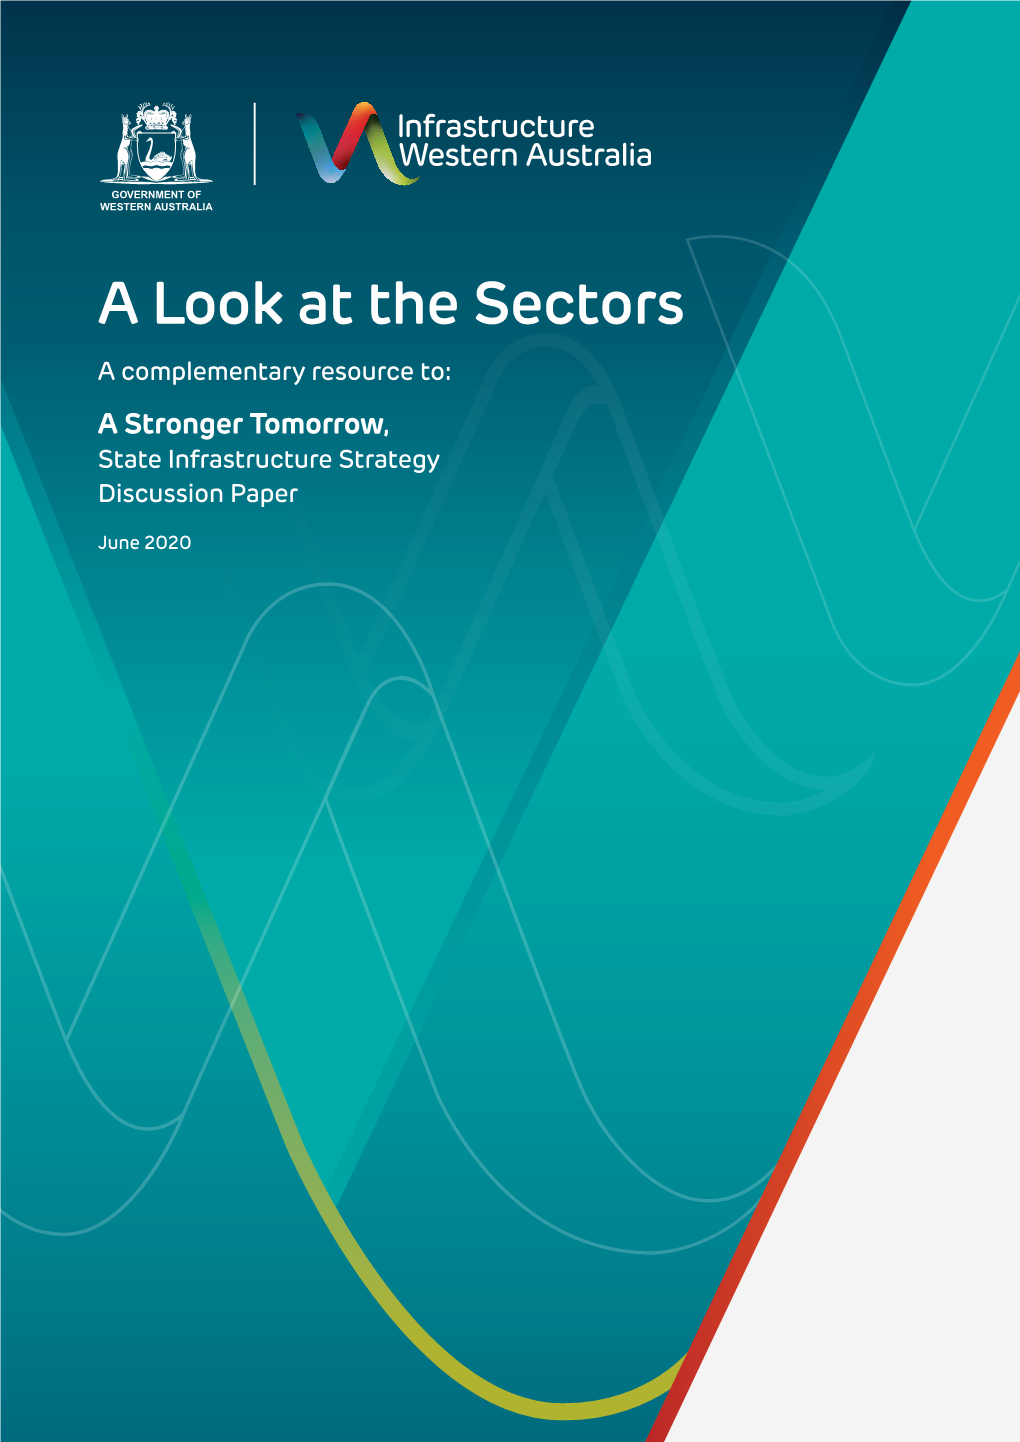 A Look at the Sectors a Complementary Resource To